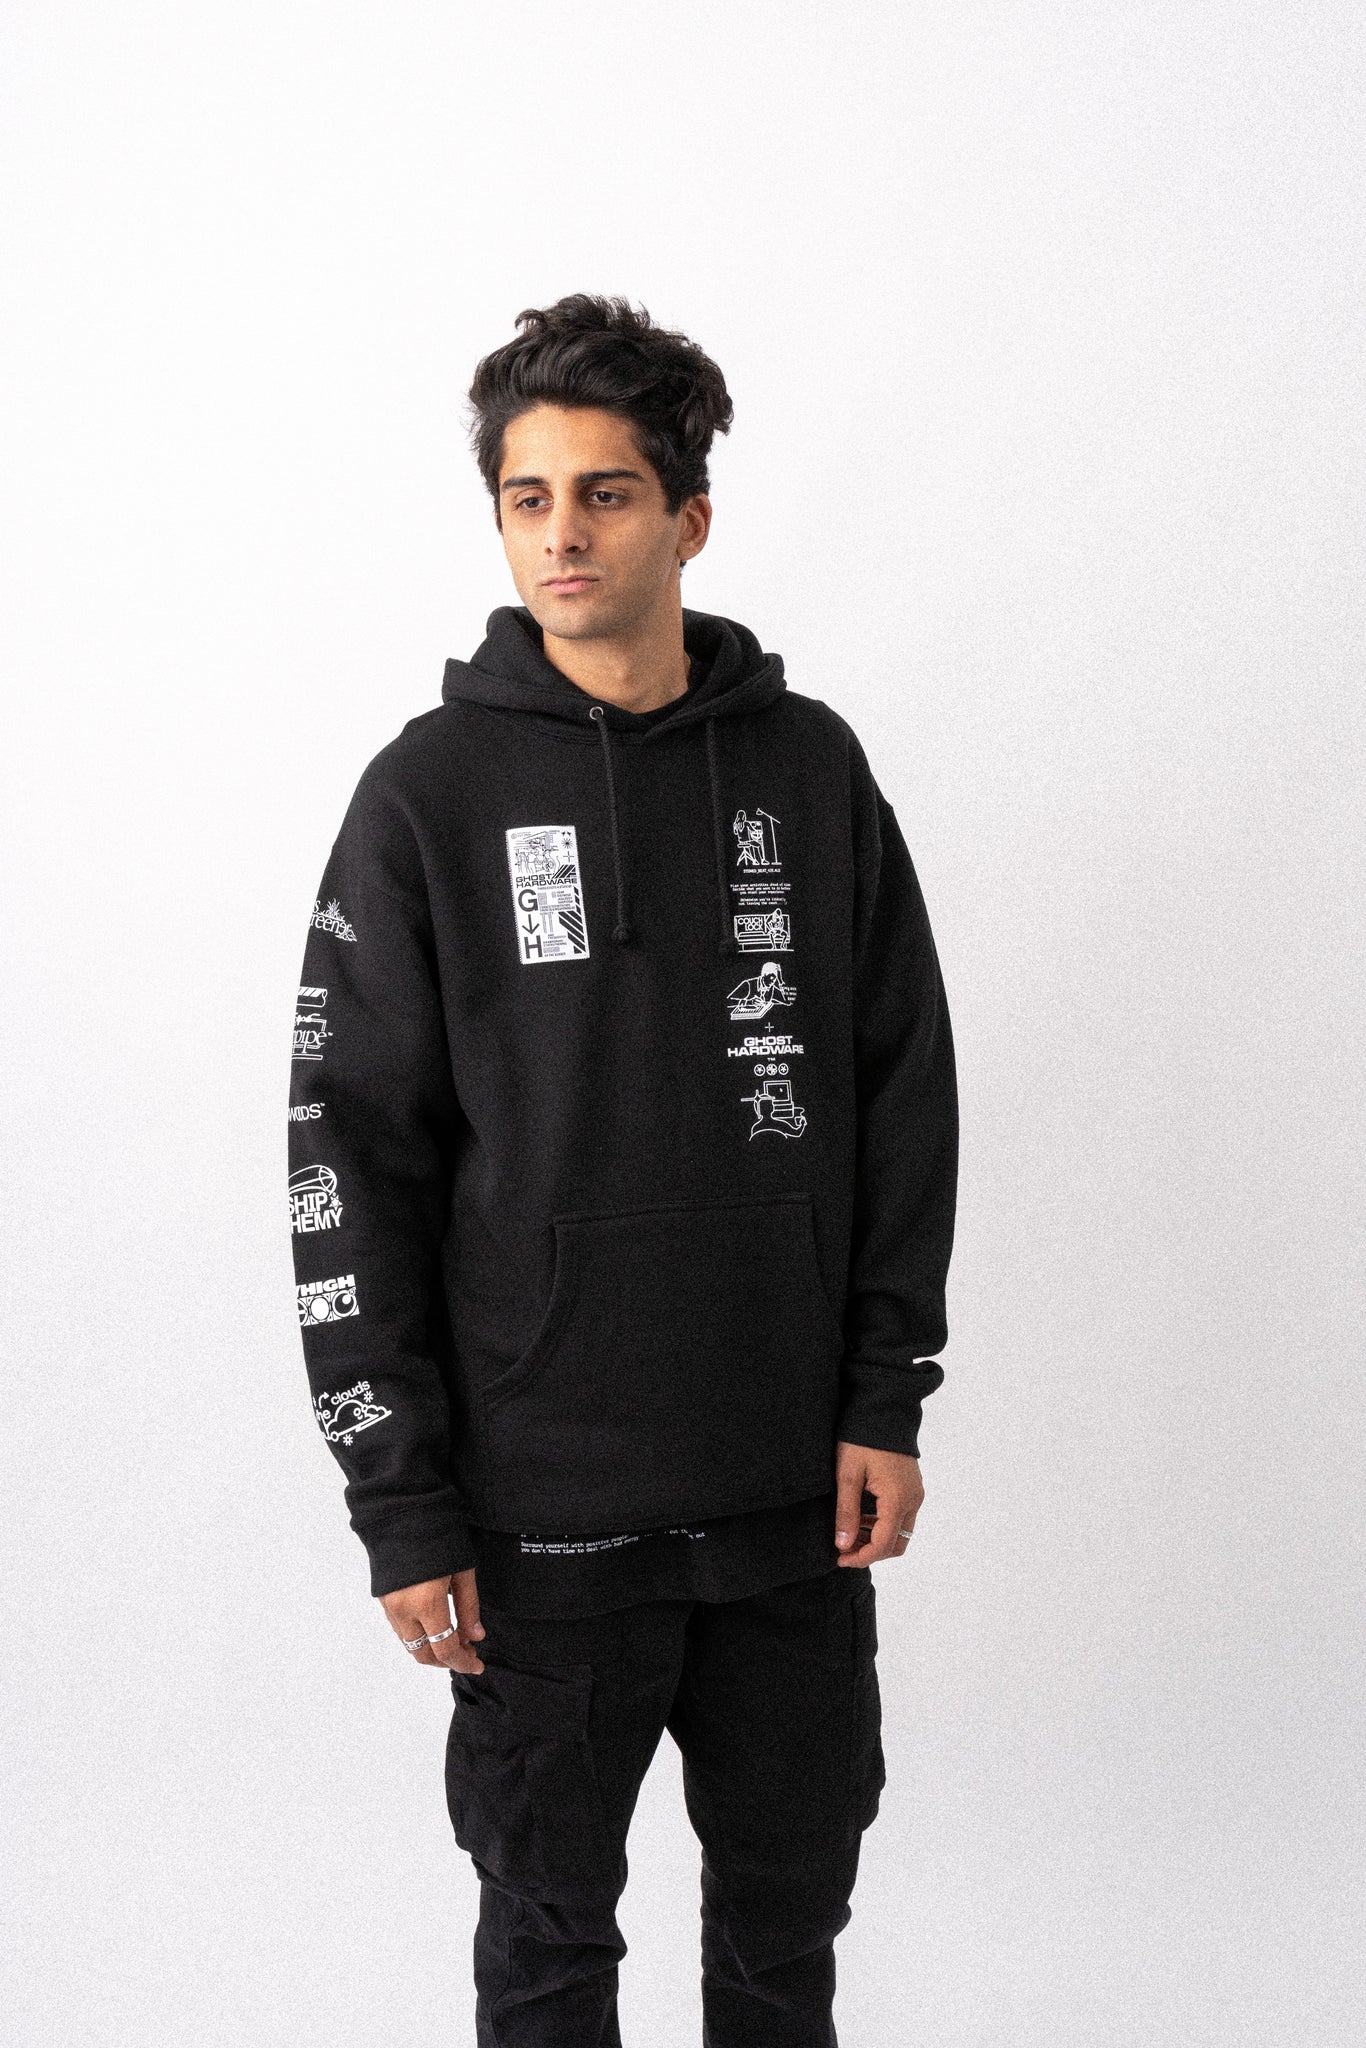 Elevated Education [ patch ] [ S ] Hoodie